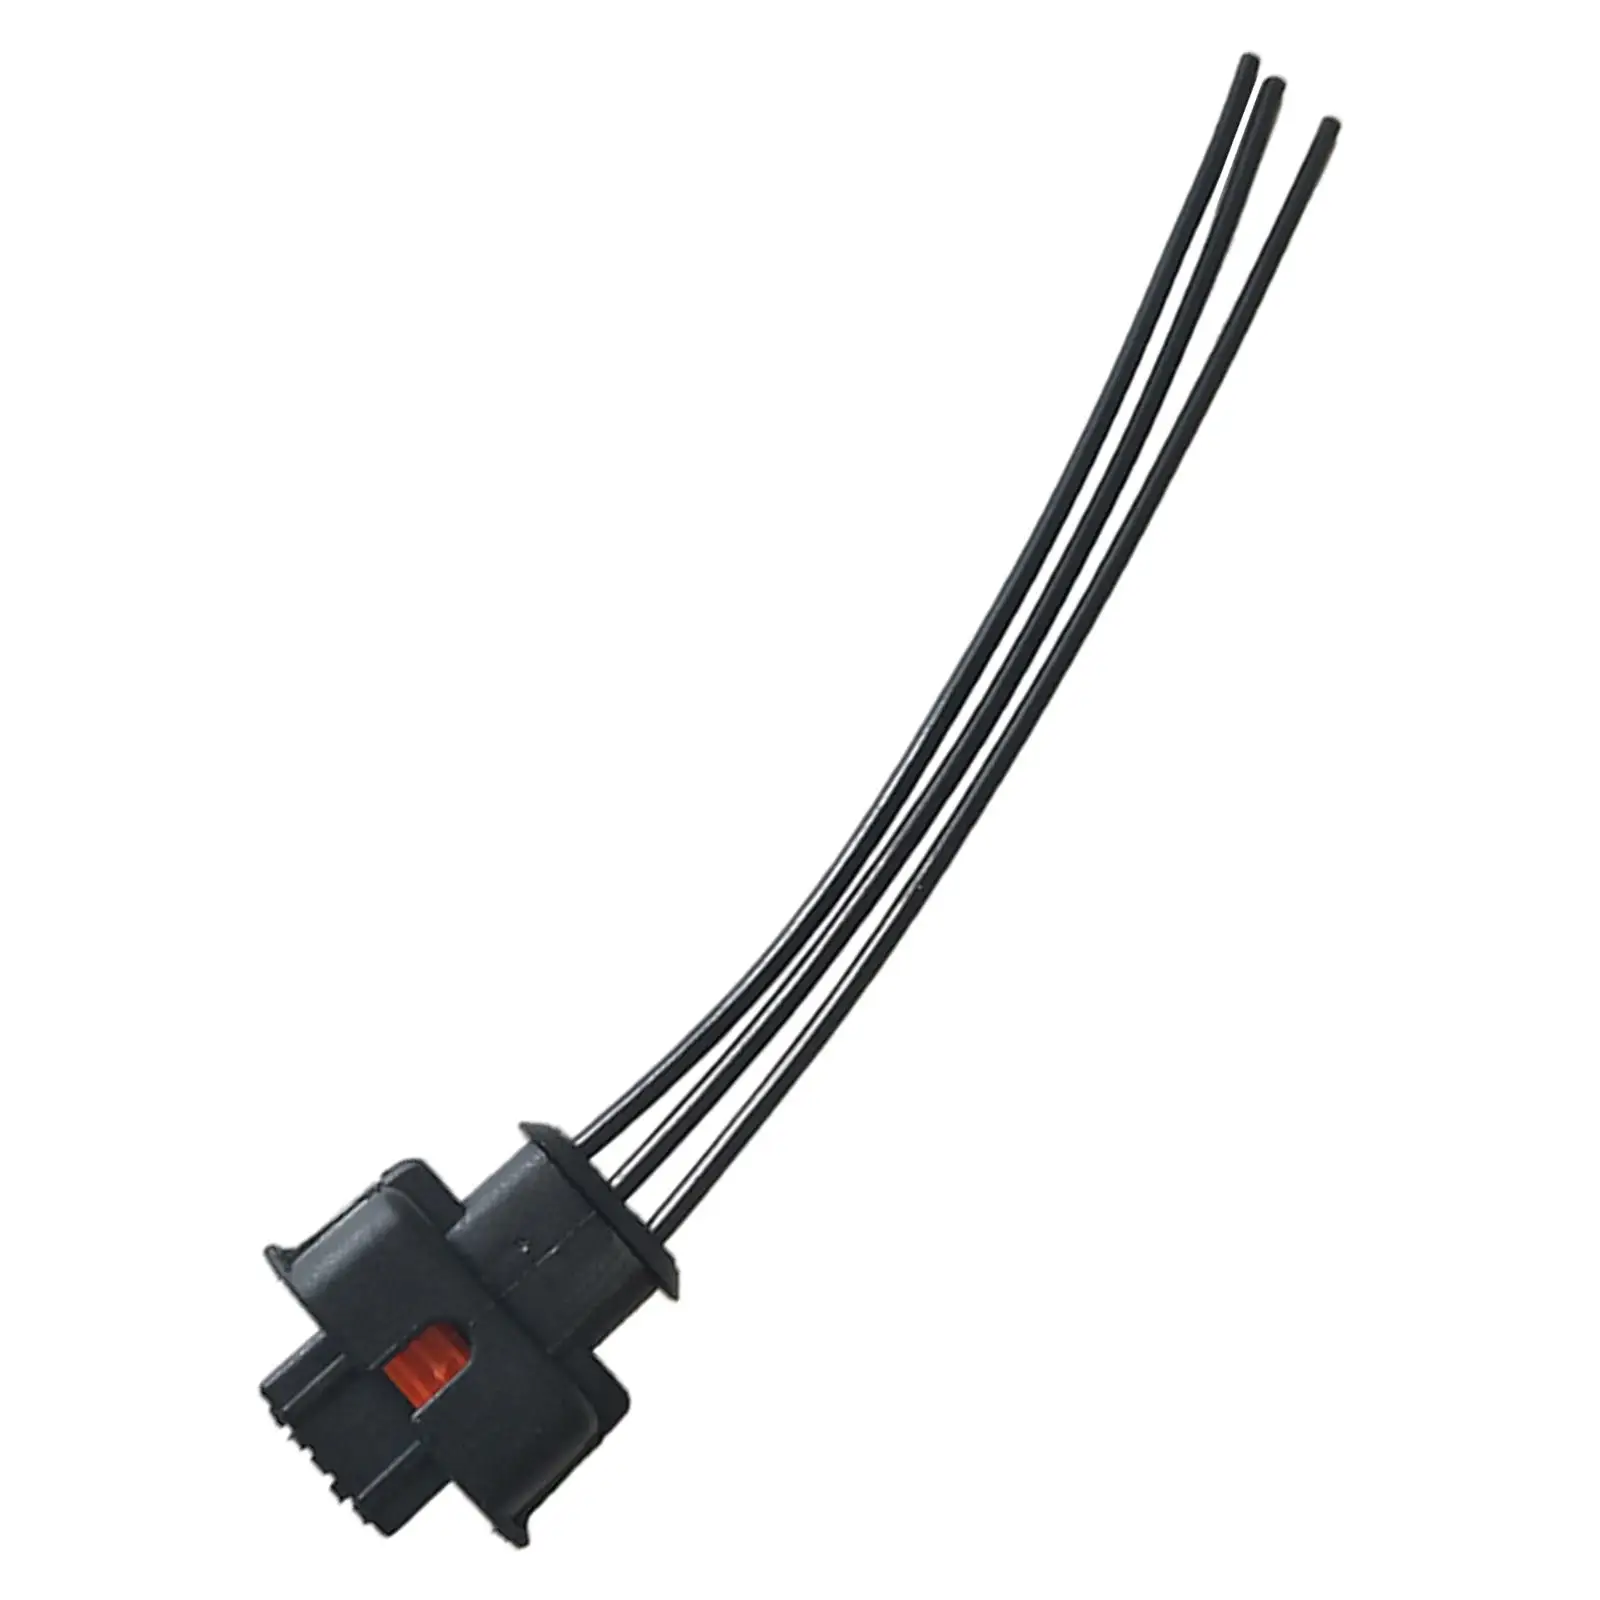 Electrical Connector ( Wire Harness) for Camshaft Position Sensor 5S1348 A0041536928 Fit for  S65 C55  